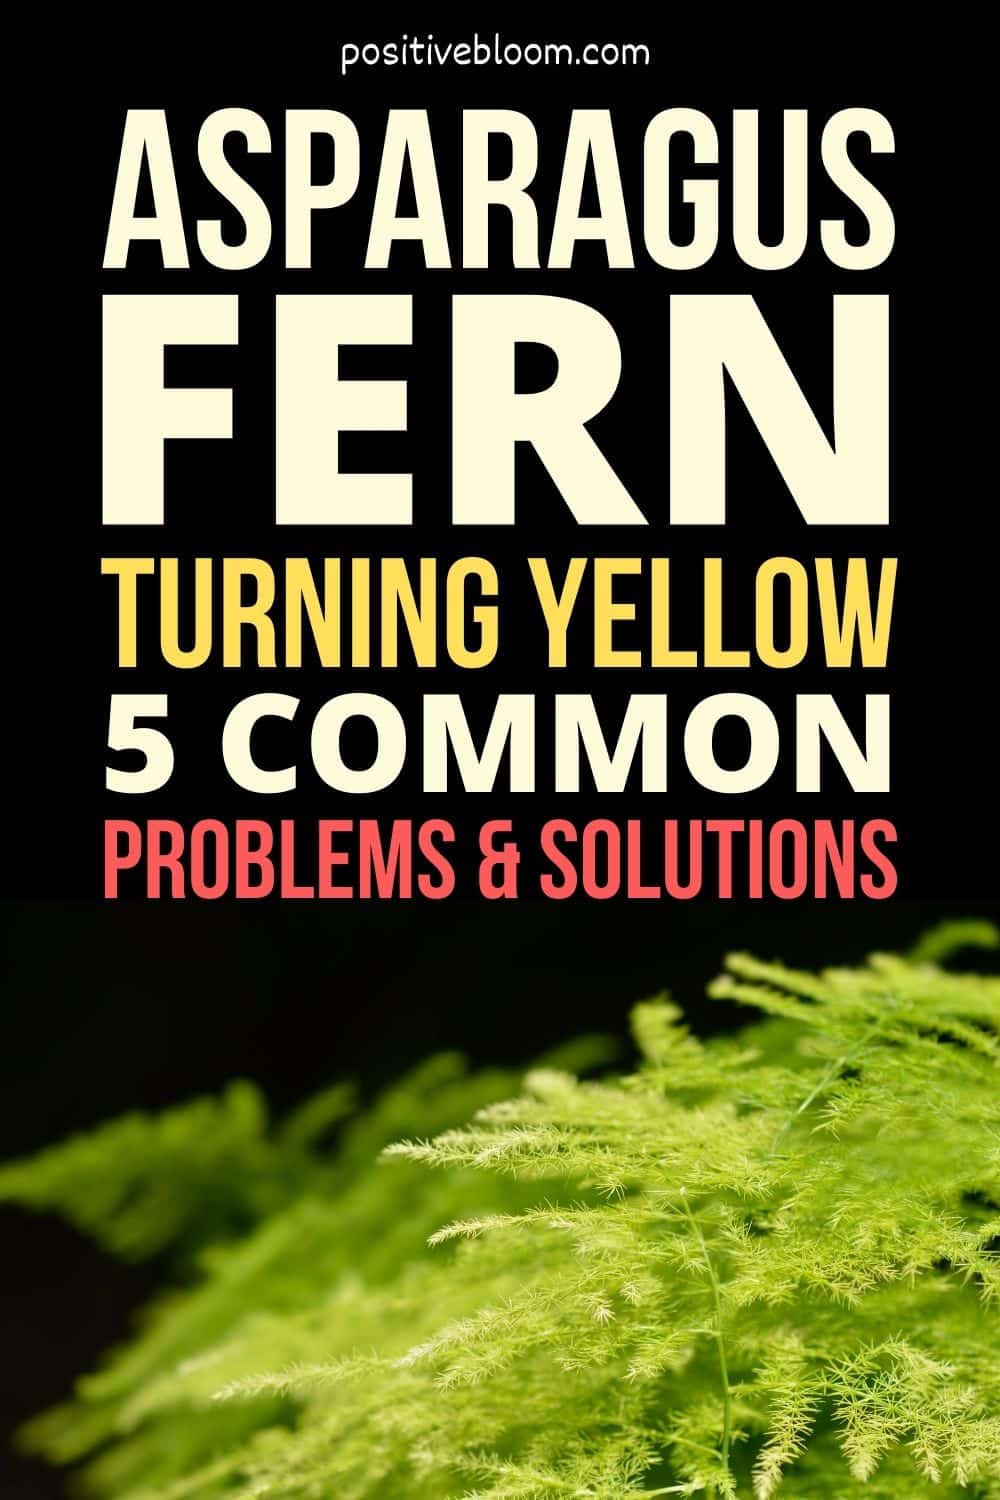 Asparagus Fern Turning Yellow 5 Common Problems & Solutions